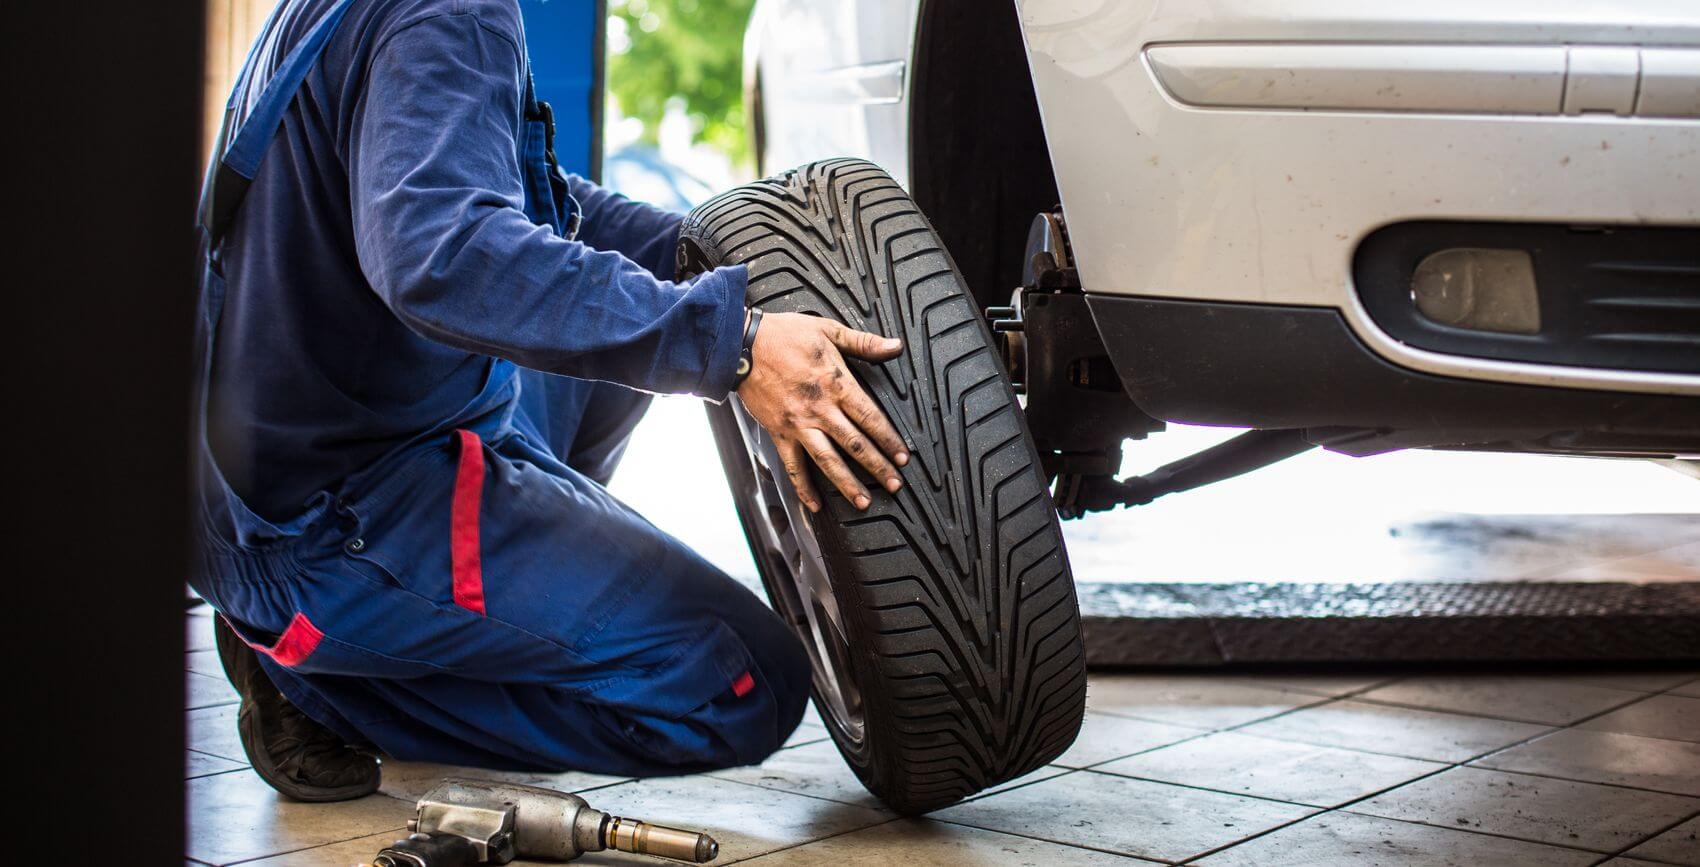 Our tire experts are hard at work